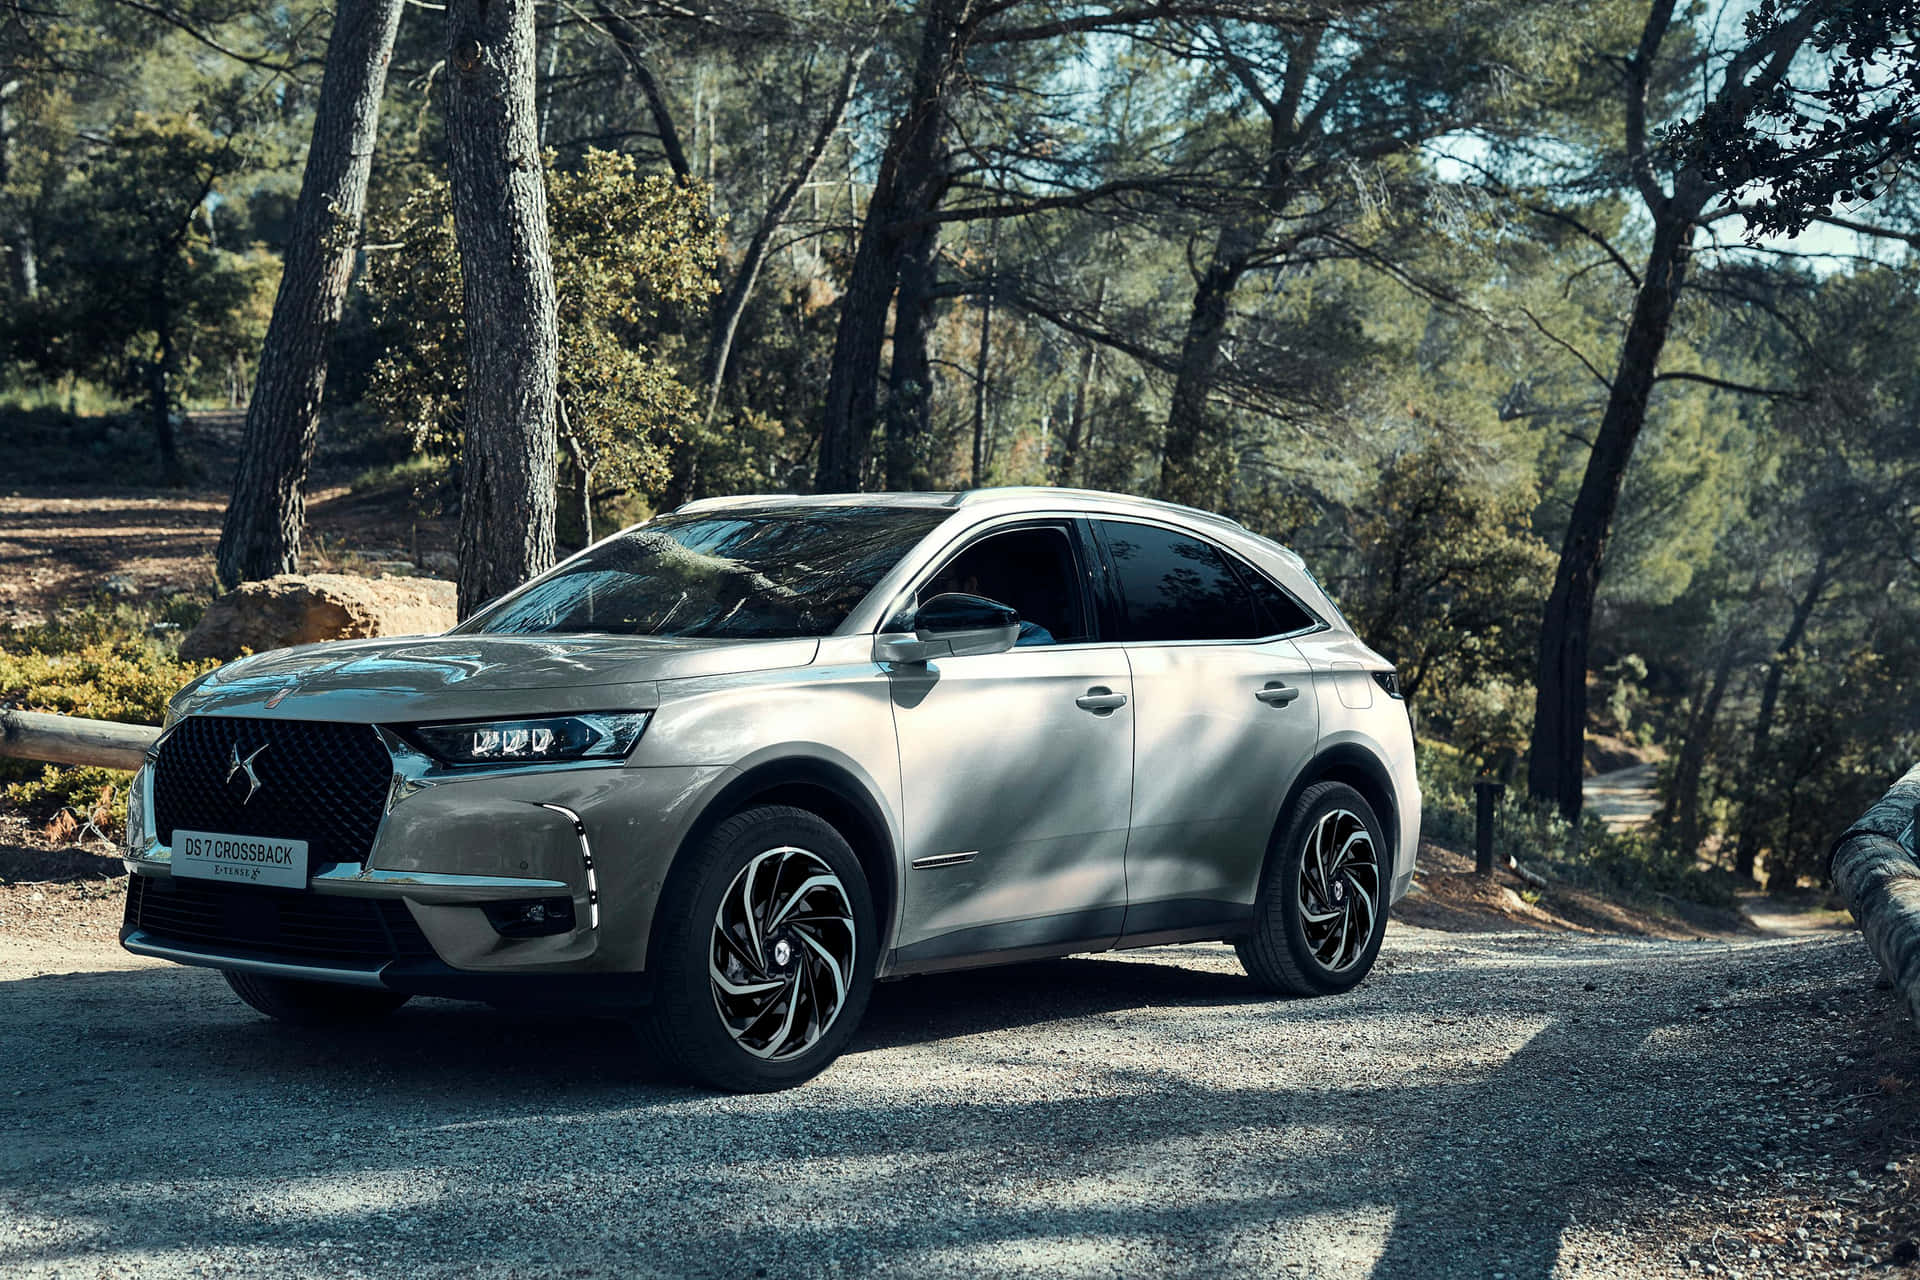 100+] Ds 7 Crossback E-tense Wallpapers